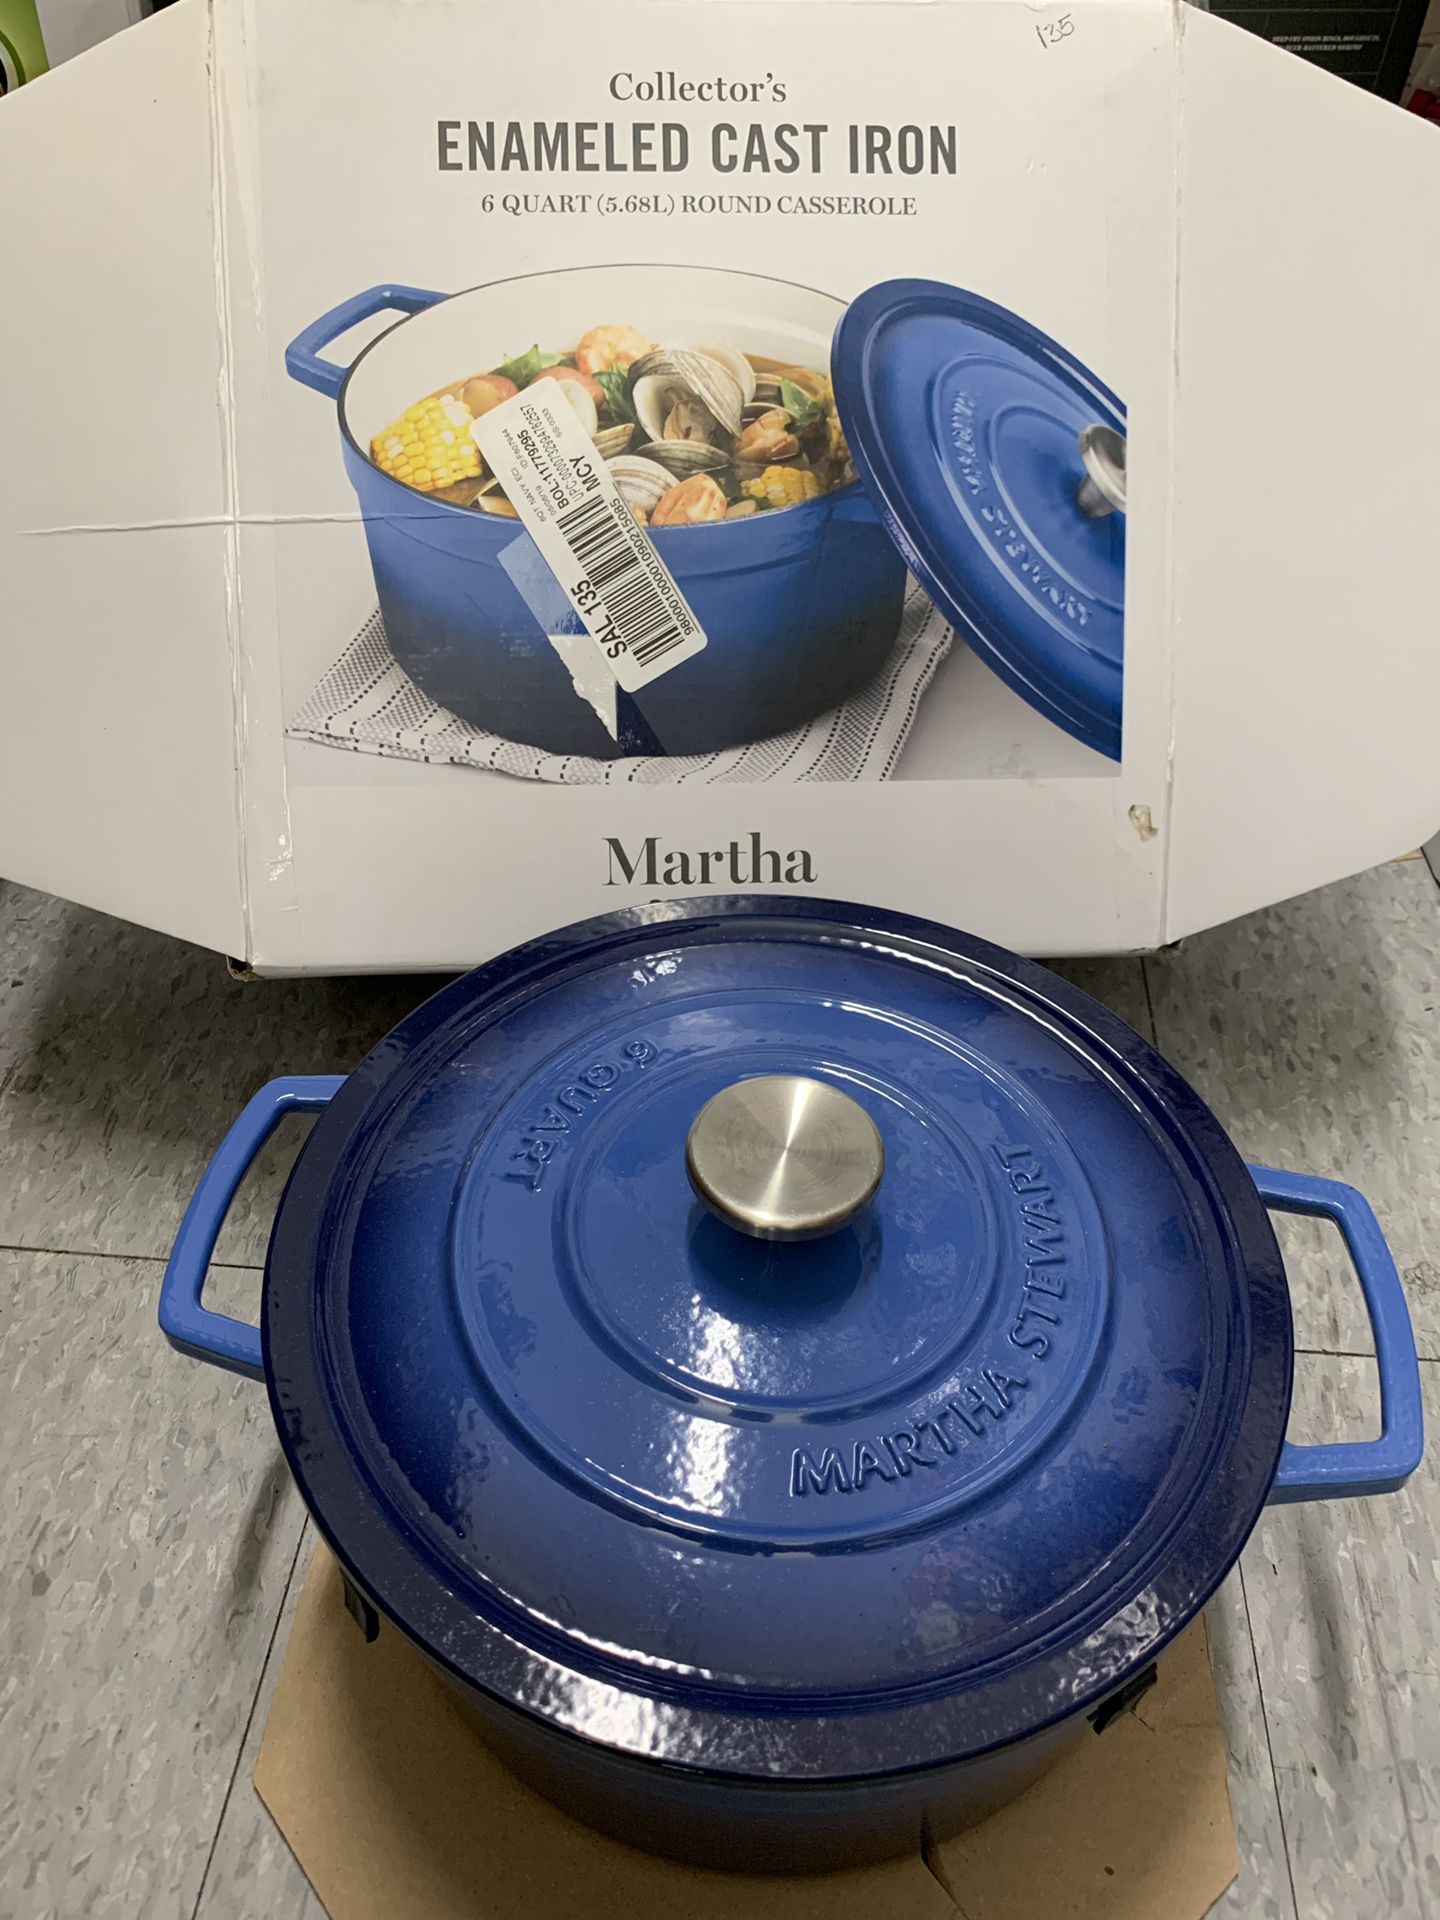 Enameled cast iron 6 quarters $758 qts 80, Fry Pan 12 inches $40